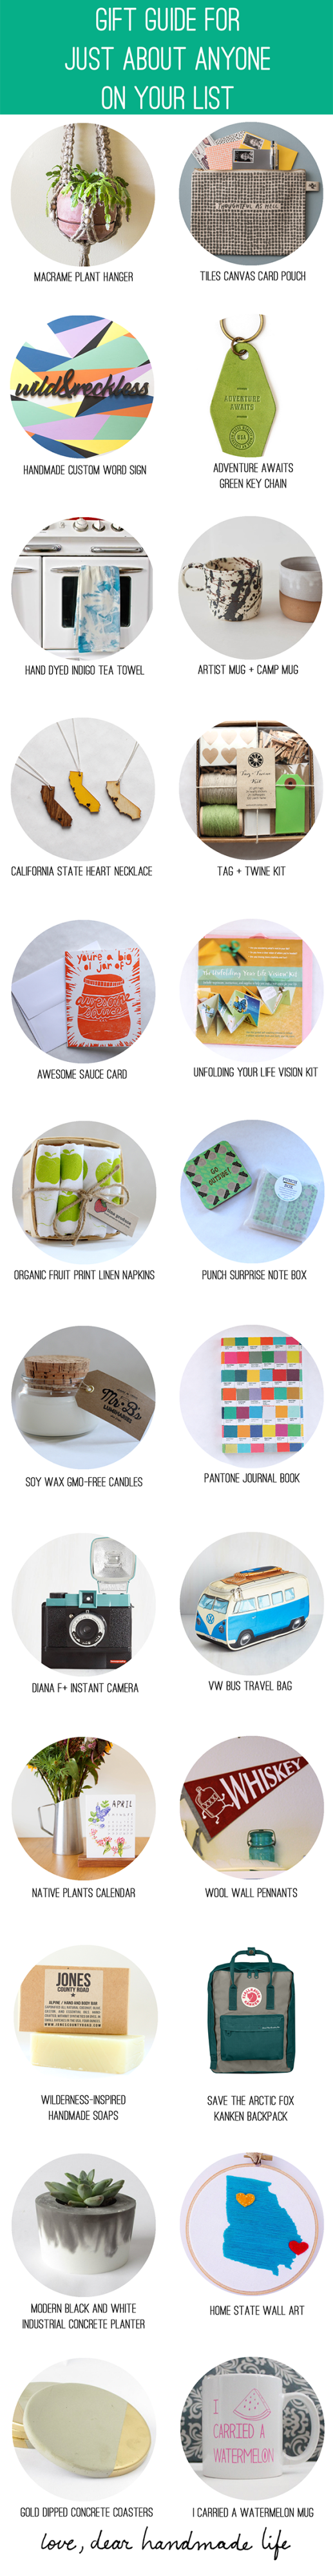 Holiday Gift Guide for Just About Anyone on Your List from Dear Handmade Life